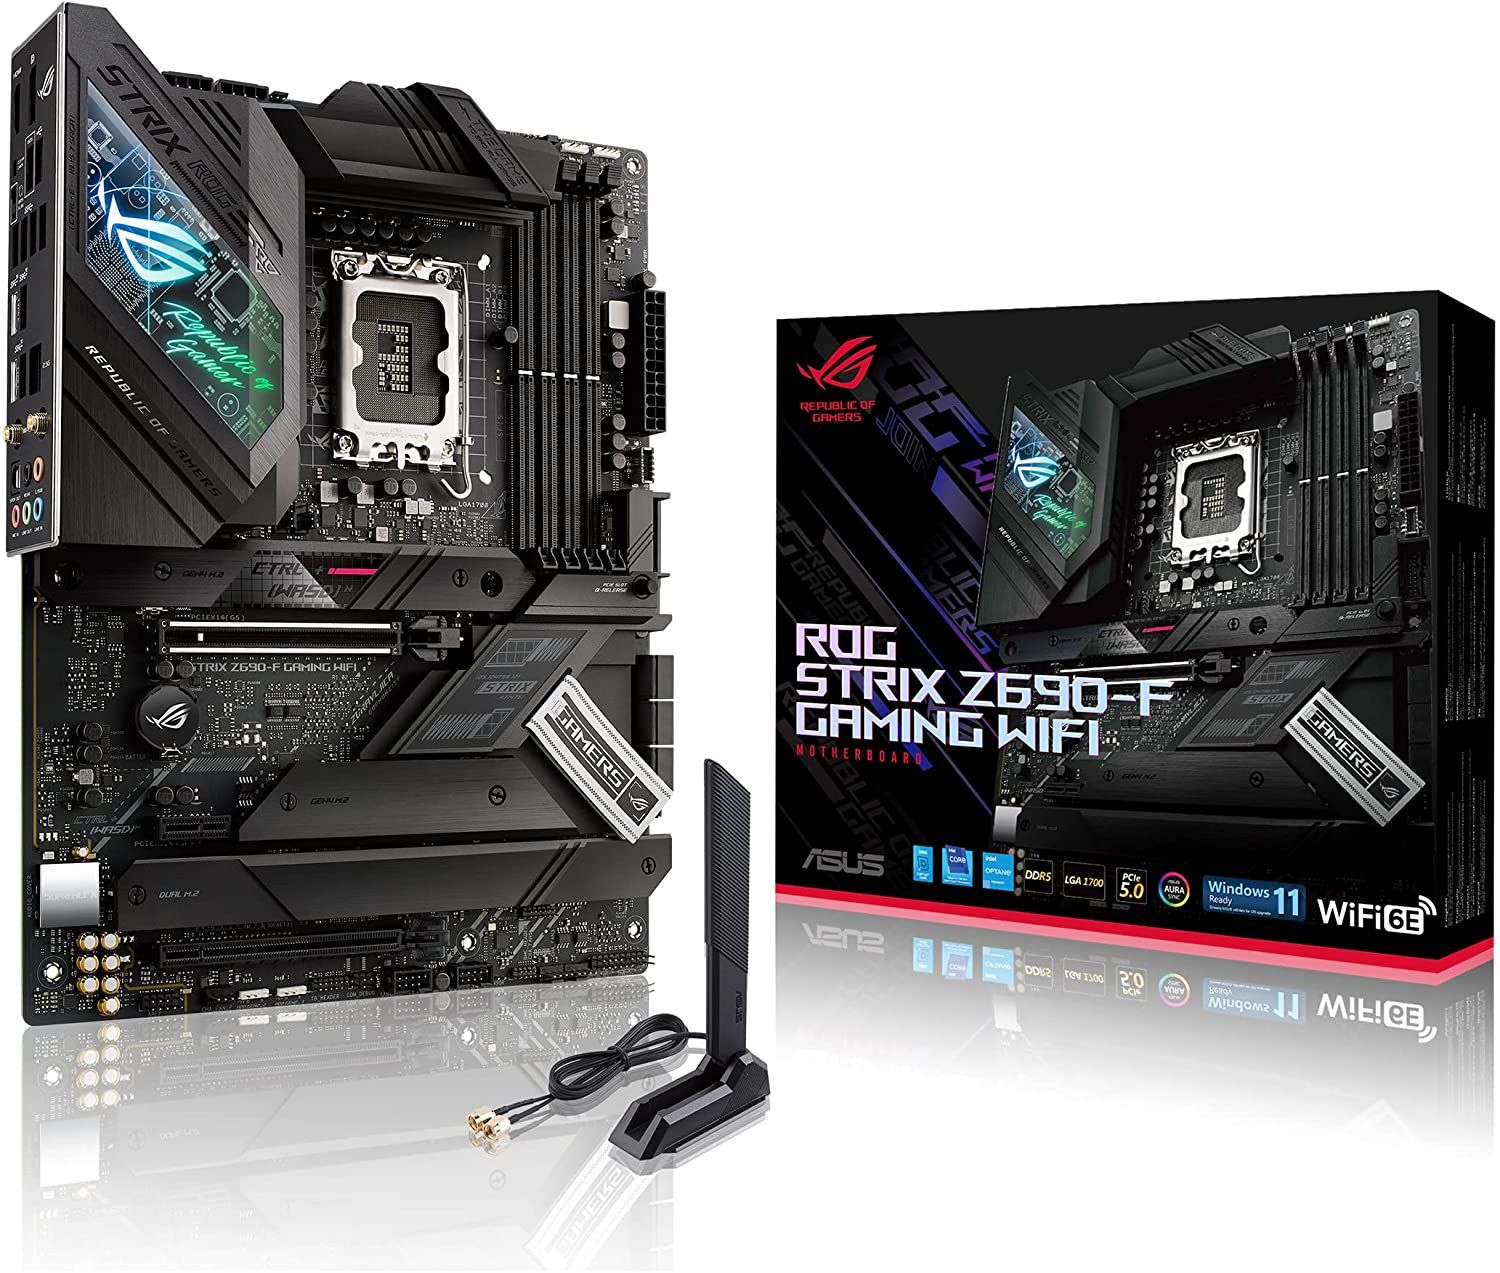 An image showing the complete ASUS ROG Strix Z690-F product